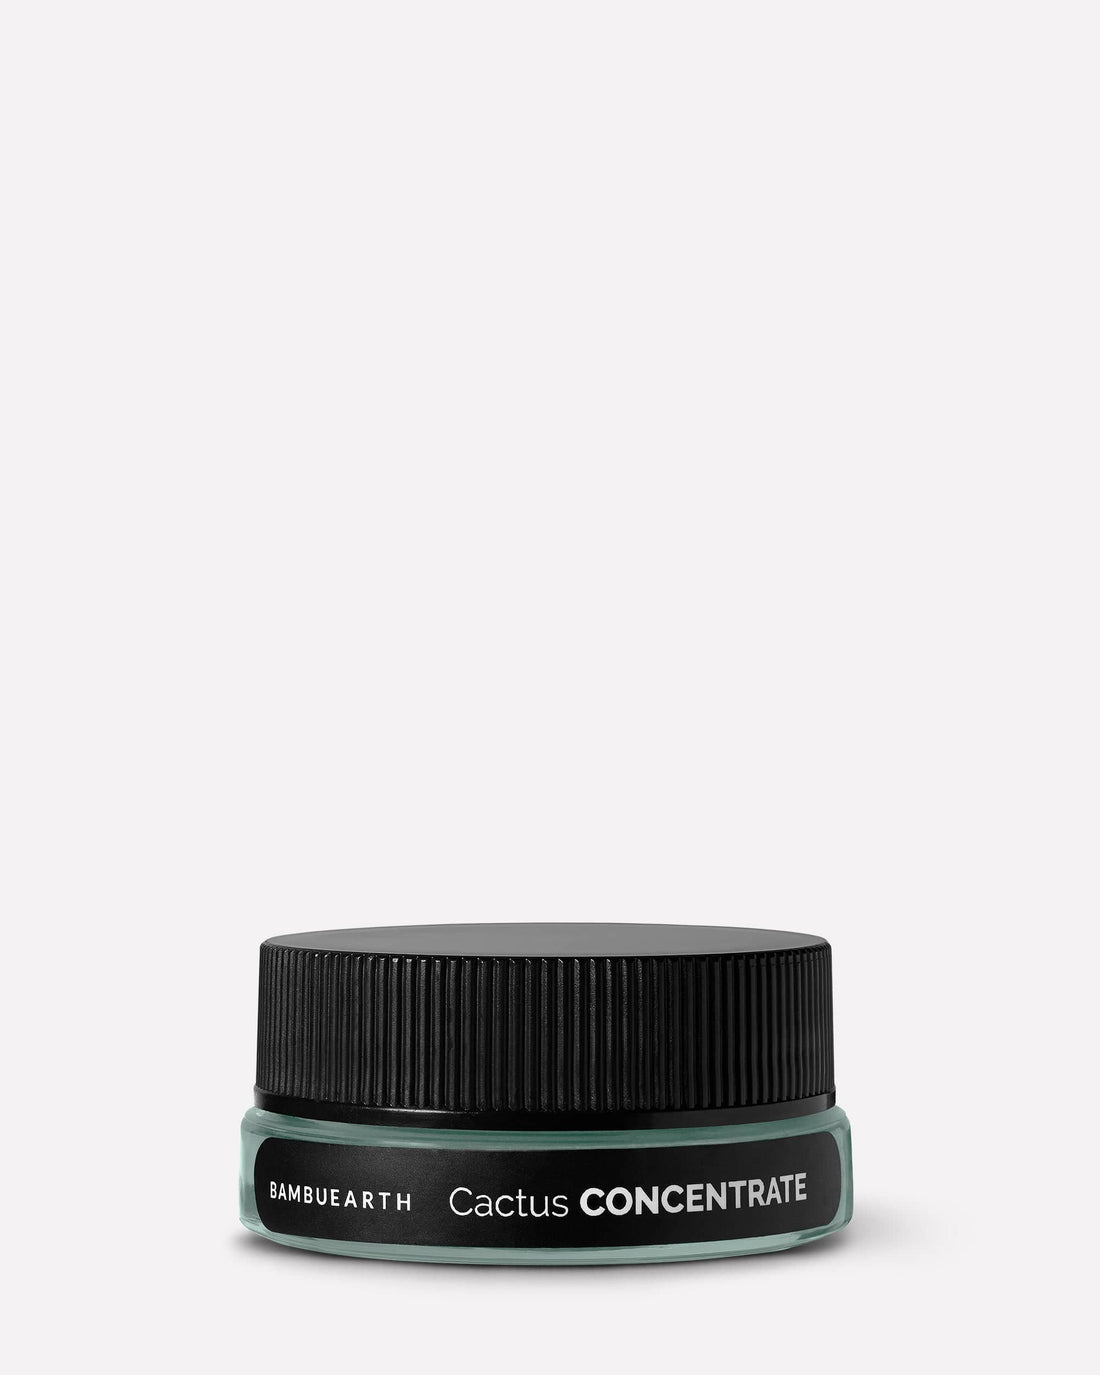 Mini Intense Hydration Cactus Concentrate